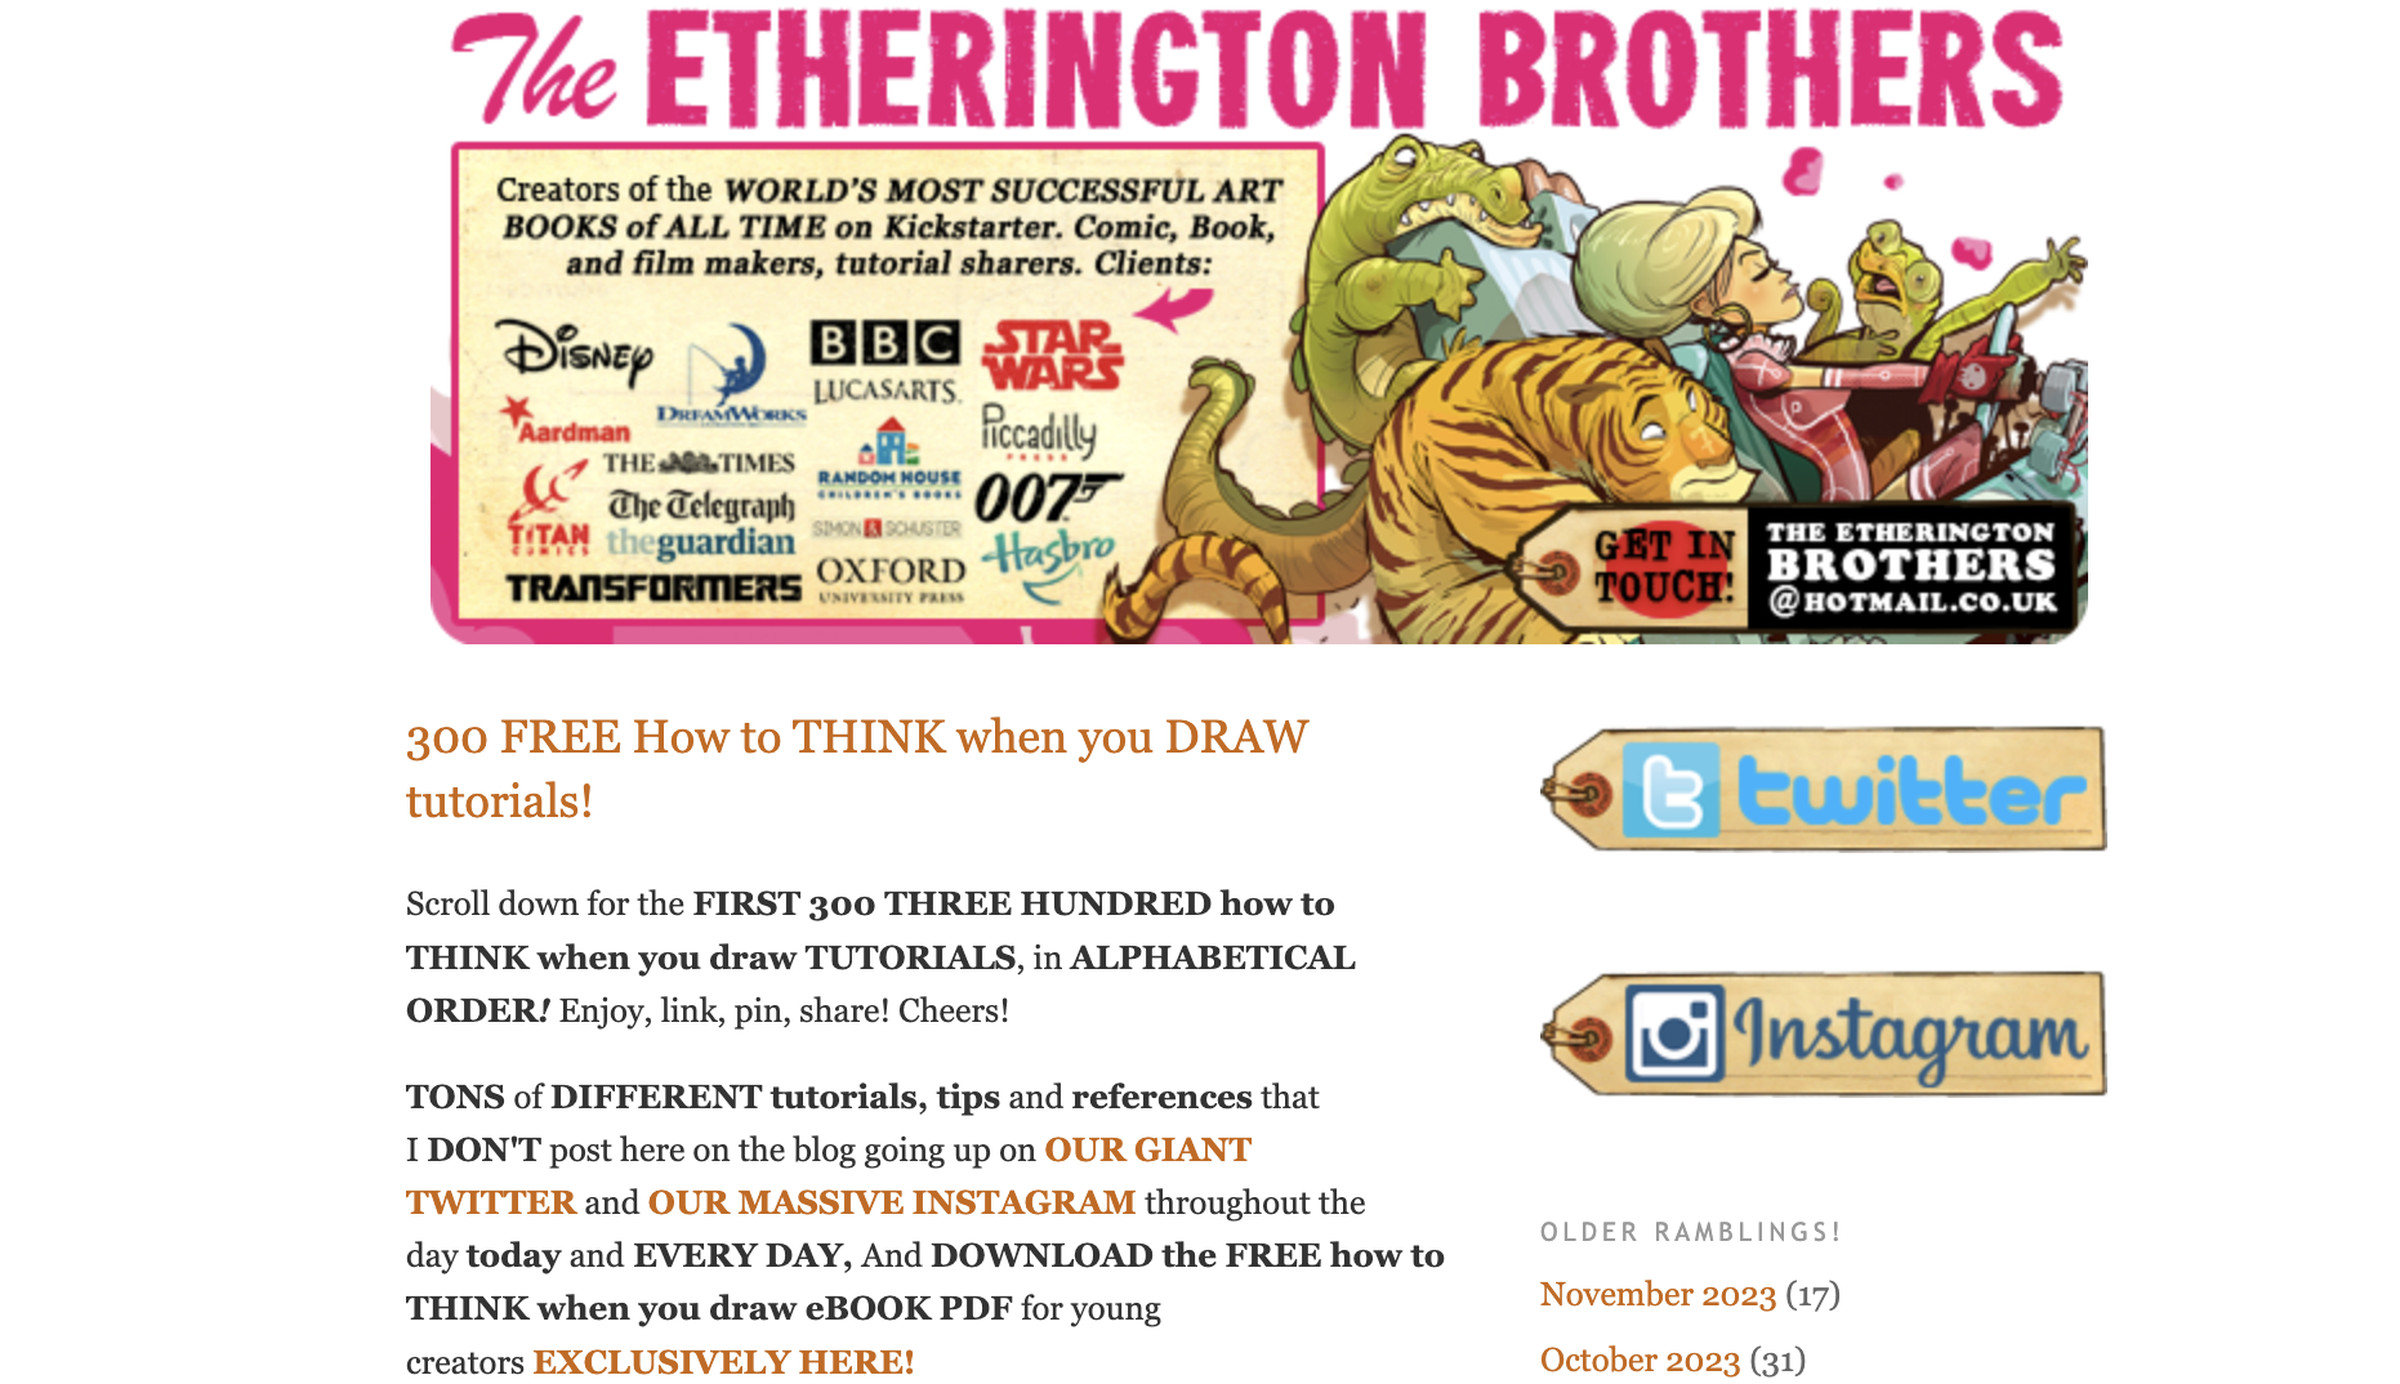 The Etherington Brothers site